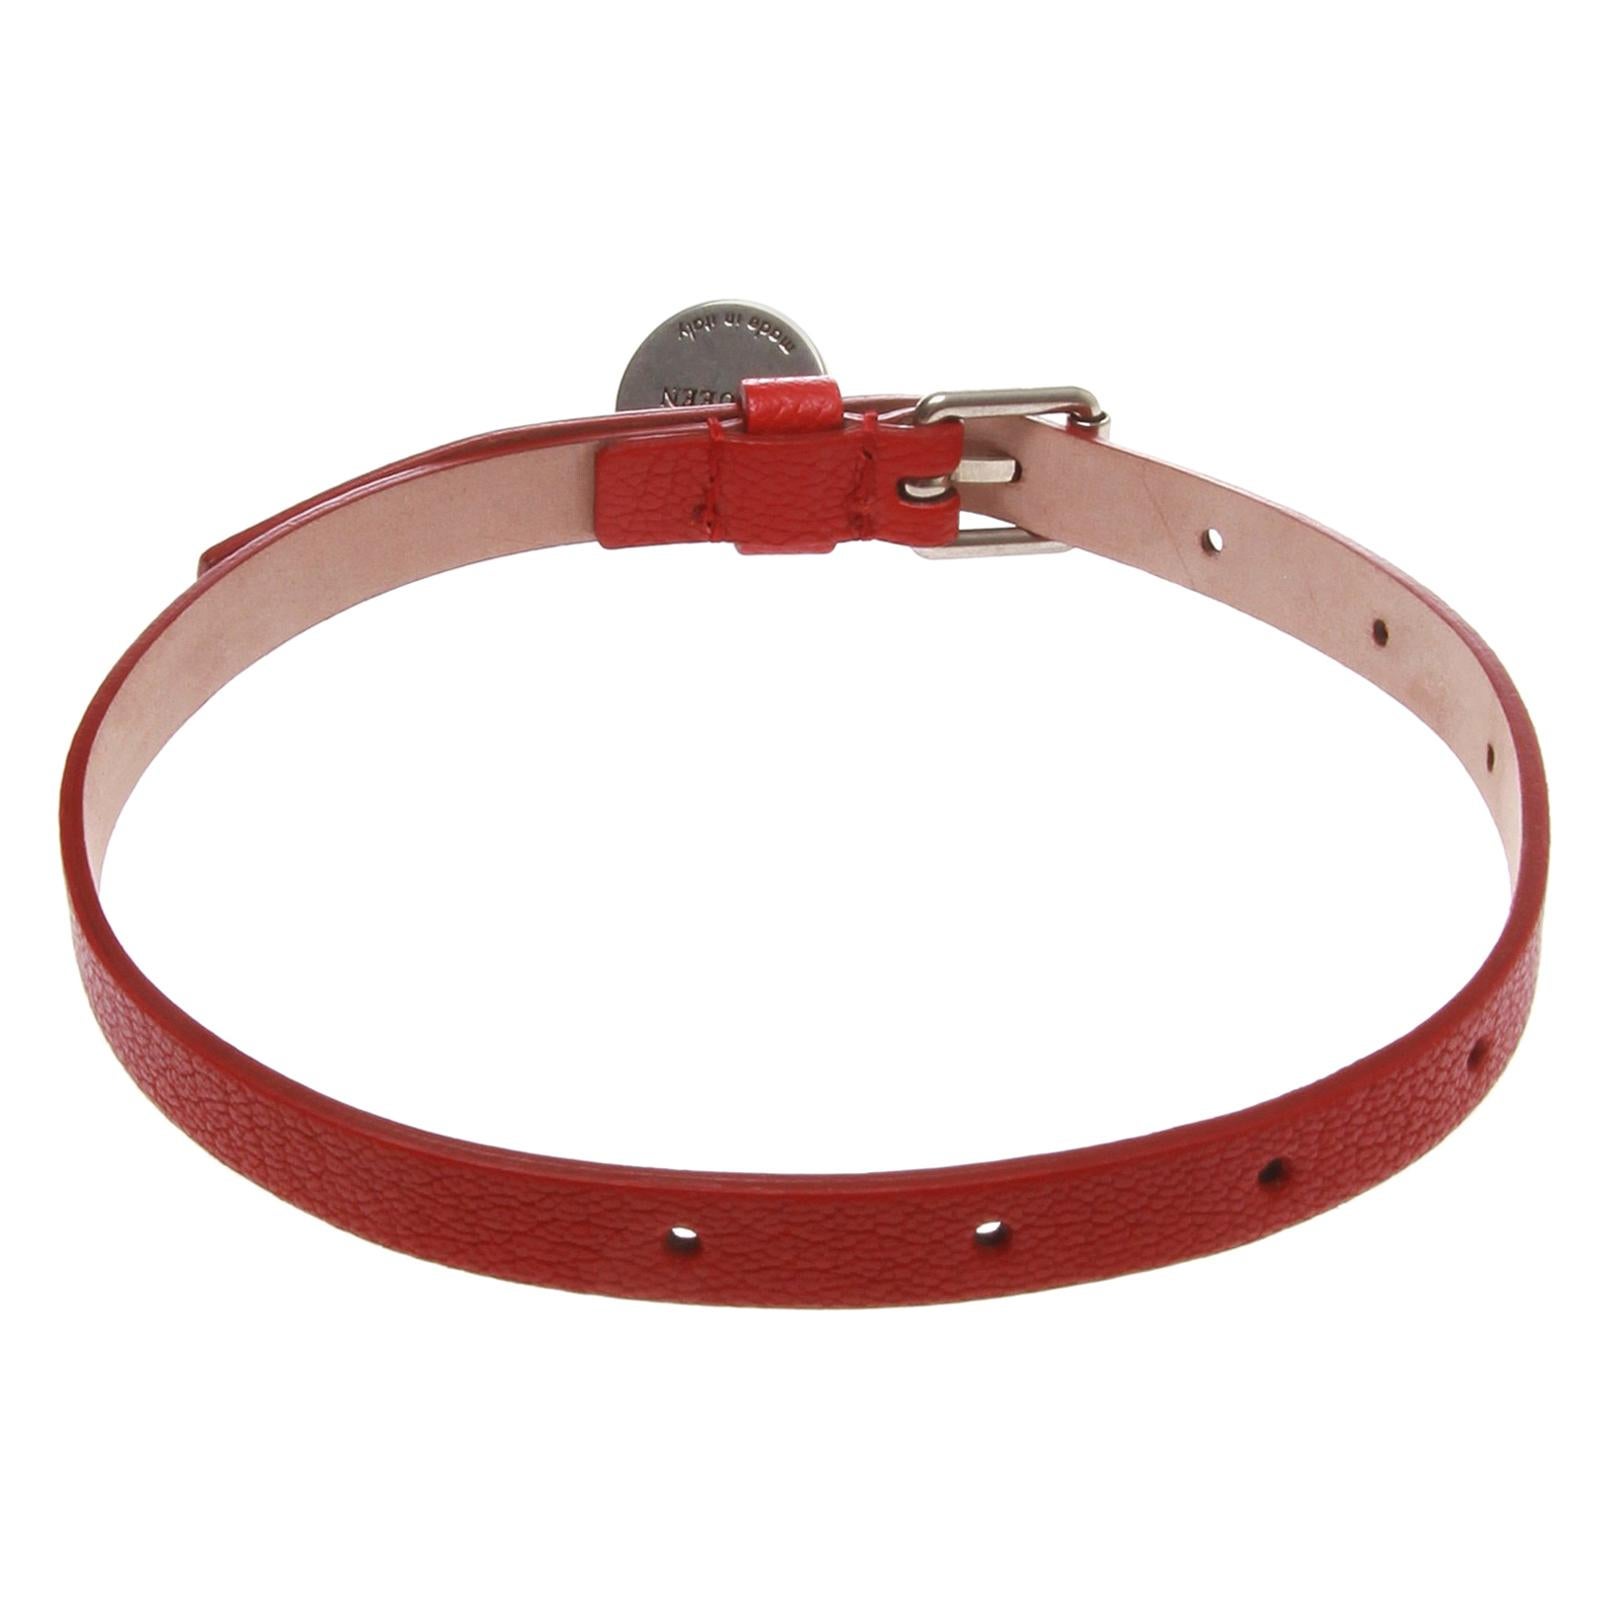 Alexandra Mcqueen red leather bracelet with small skull pendant with glass eyes